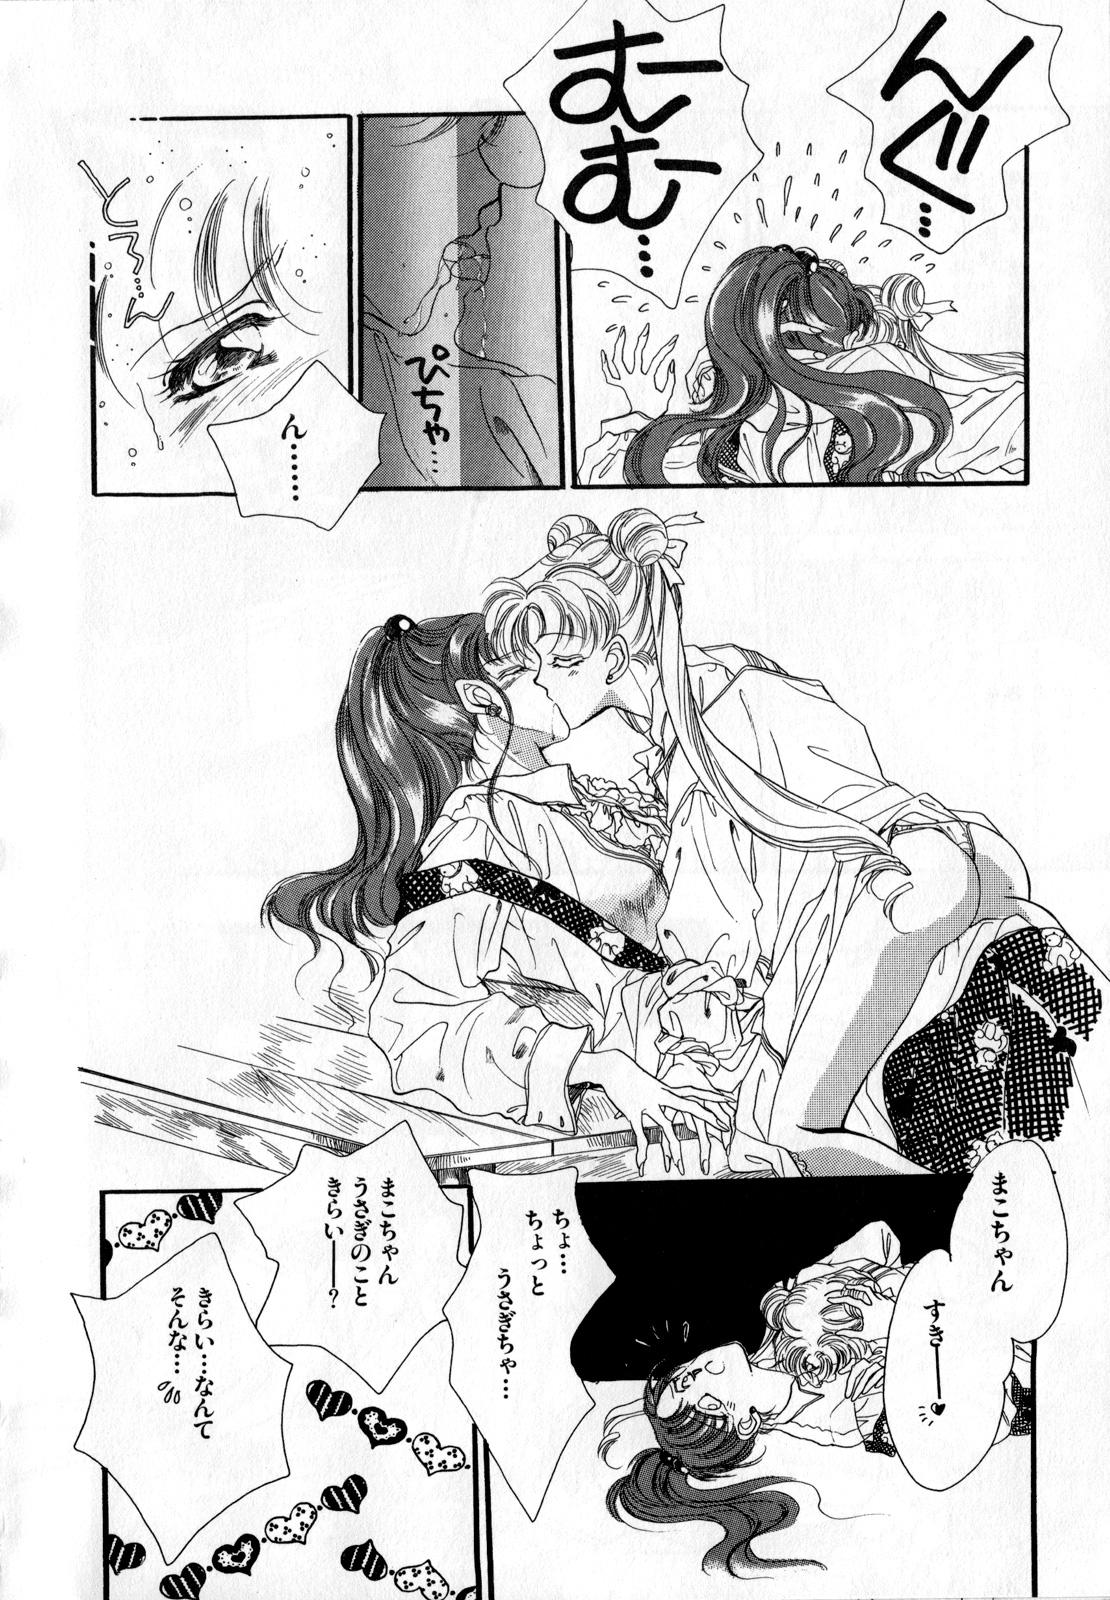 Blow Job Lunatic Party 2 - Sailor moon Point Of View - Page 7